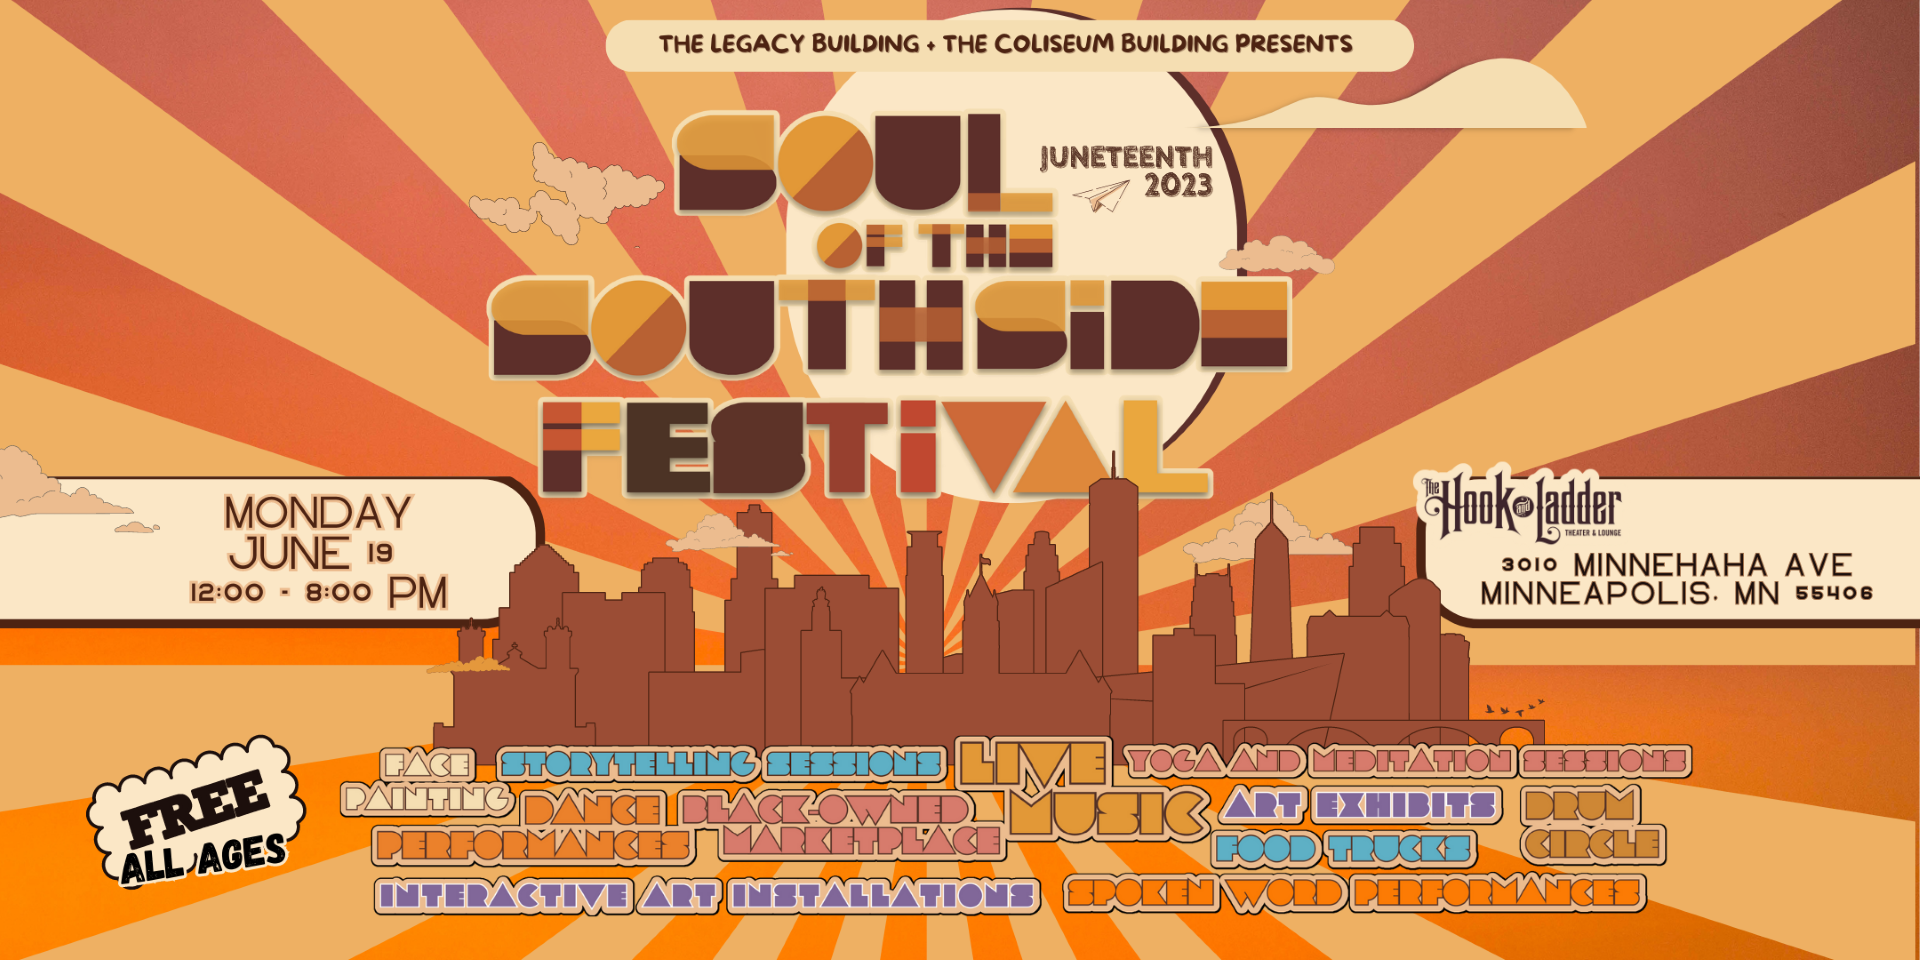 Soul Of The Southside 2023 Juneteenth Festival Monday, June 19 Under The Canopy at The Hook and Ladder Theater 1-8pm :: All Ages :: Family Friendly RSVP (Free Registration) ** Must RSVP In Advance For Guaranteed Admission ** Free Community Event With Limited Capacity